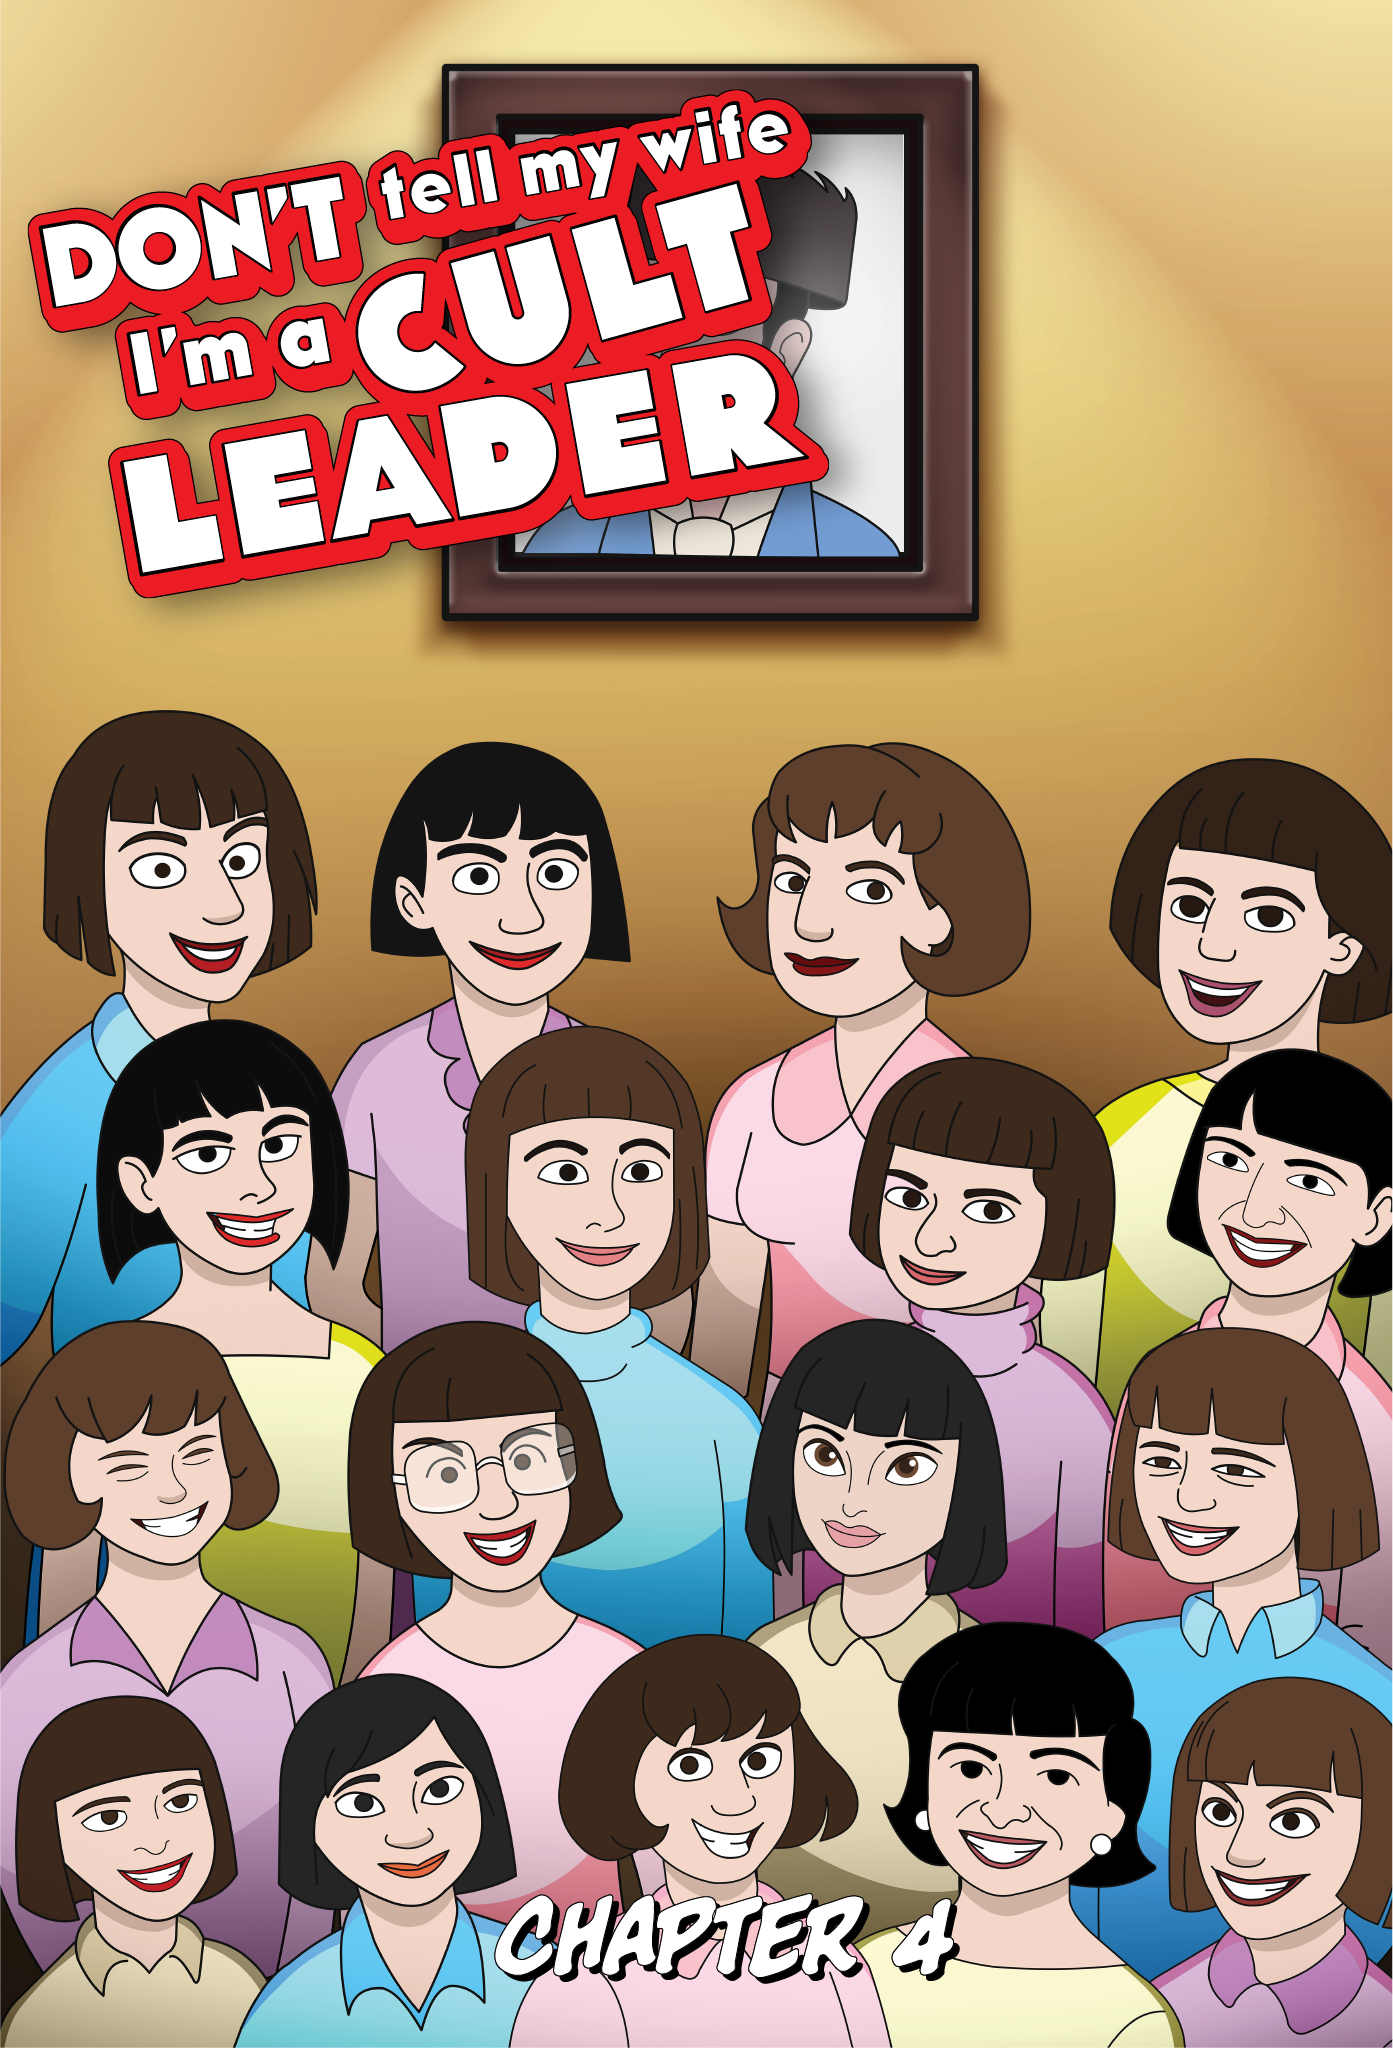 Main image of Chapter 4 of Don't Tell My Wife I'm a Cult Leader, where we see a bunch of women below a portrait of a man with a funny hat.